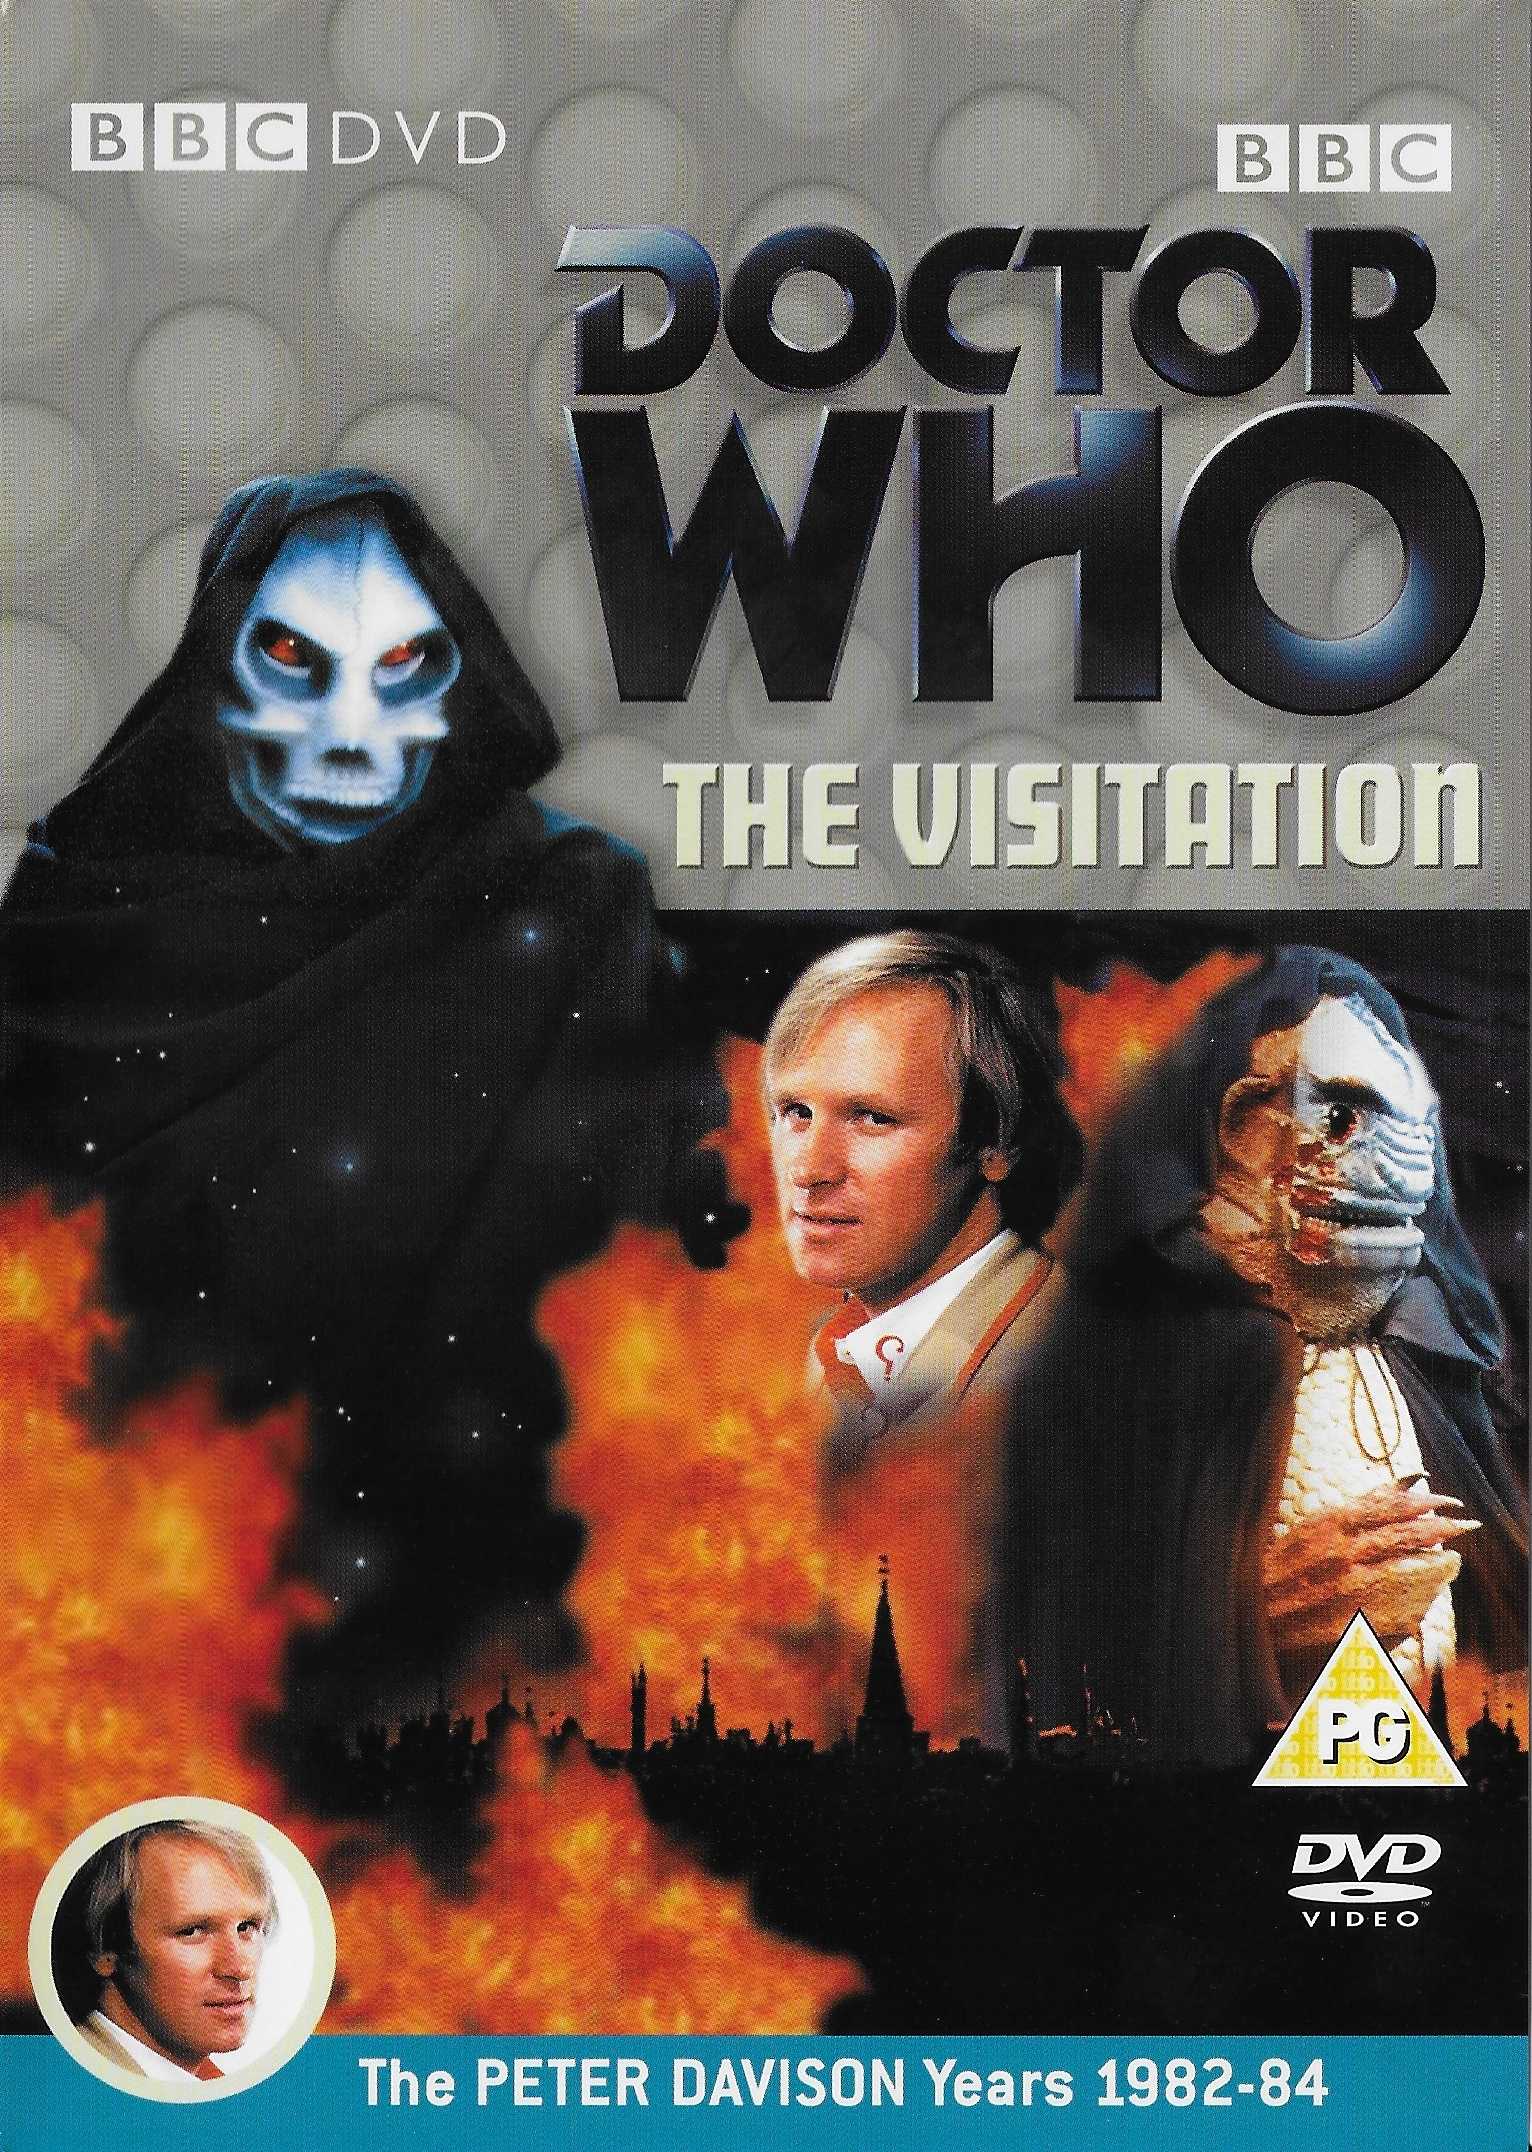 Picture of BBCDVD 1329 Doctor Who - The visitation by artist Terence Dudley from the BBC dvds - Records and Tapes library